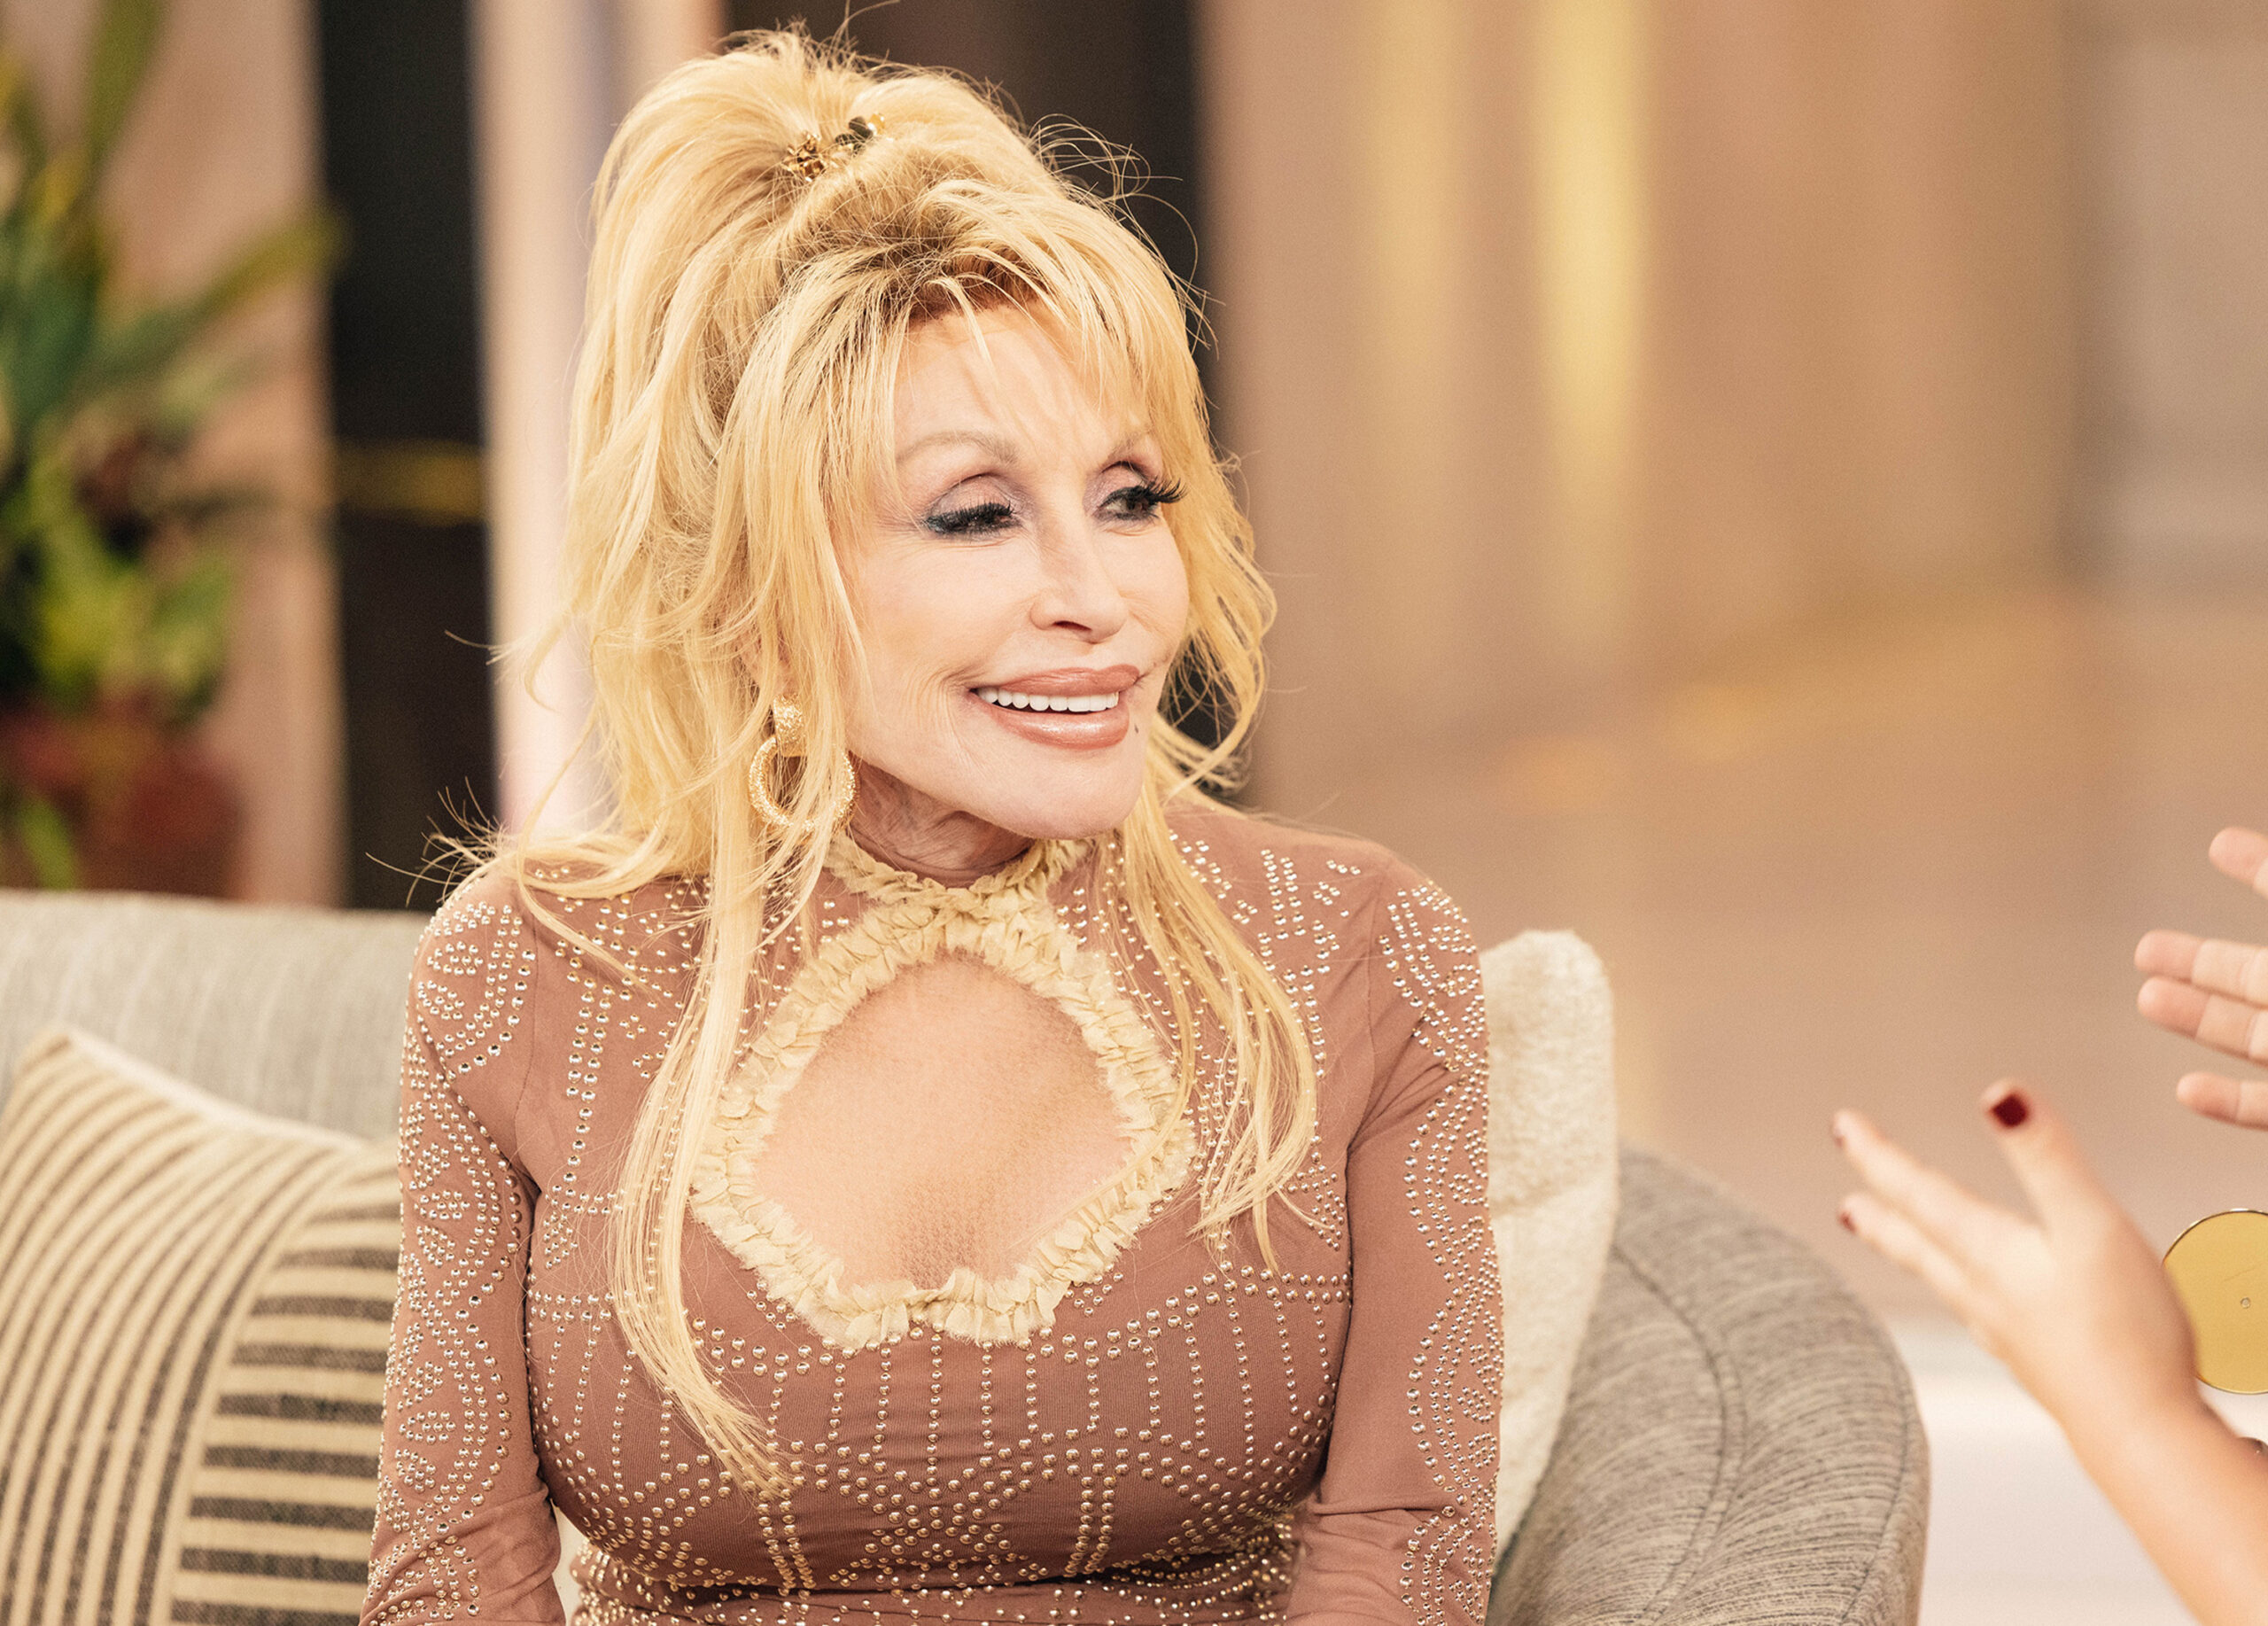 Dolly Parton Plastic Surgery Times The Star Talked About Her Past